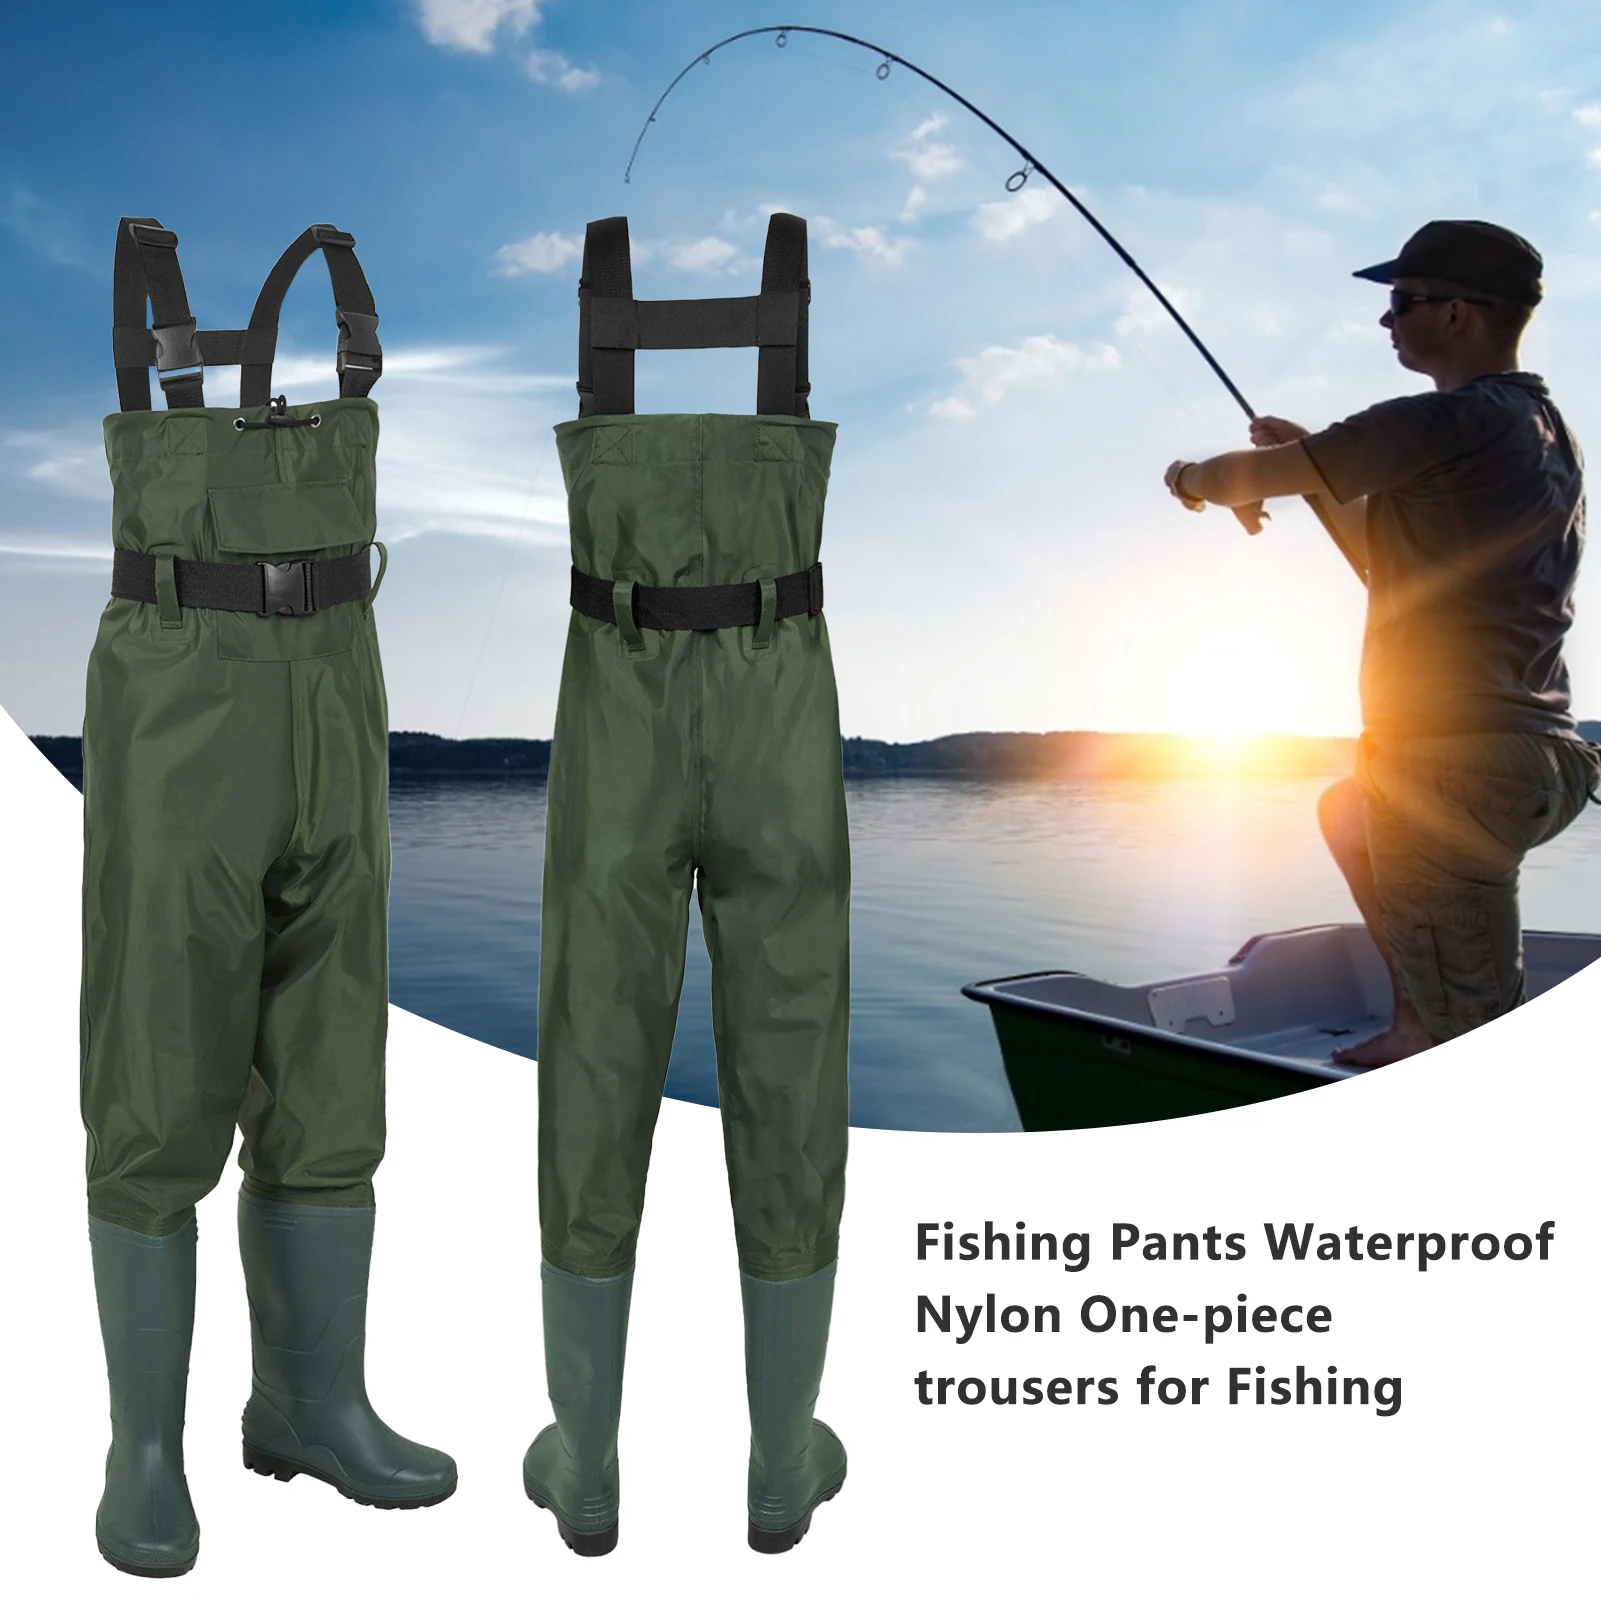 https://ae01.alicdn.com/kf/S5a91bea7bf6446aab22be30a0ba30b325/Fishing-Chest-Waders-For-Men-With-Boots-Waterproof-Nylon-Fishing-Hunting-Chest-Waders-Pant-One-piece.jpg